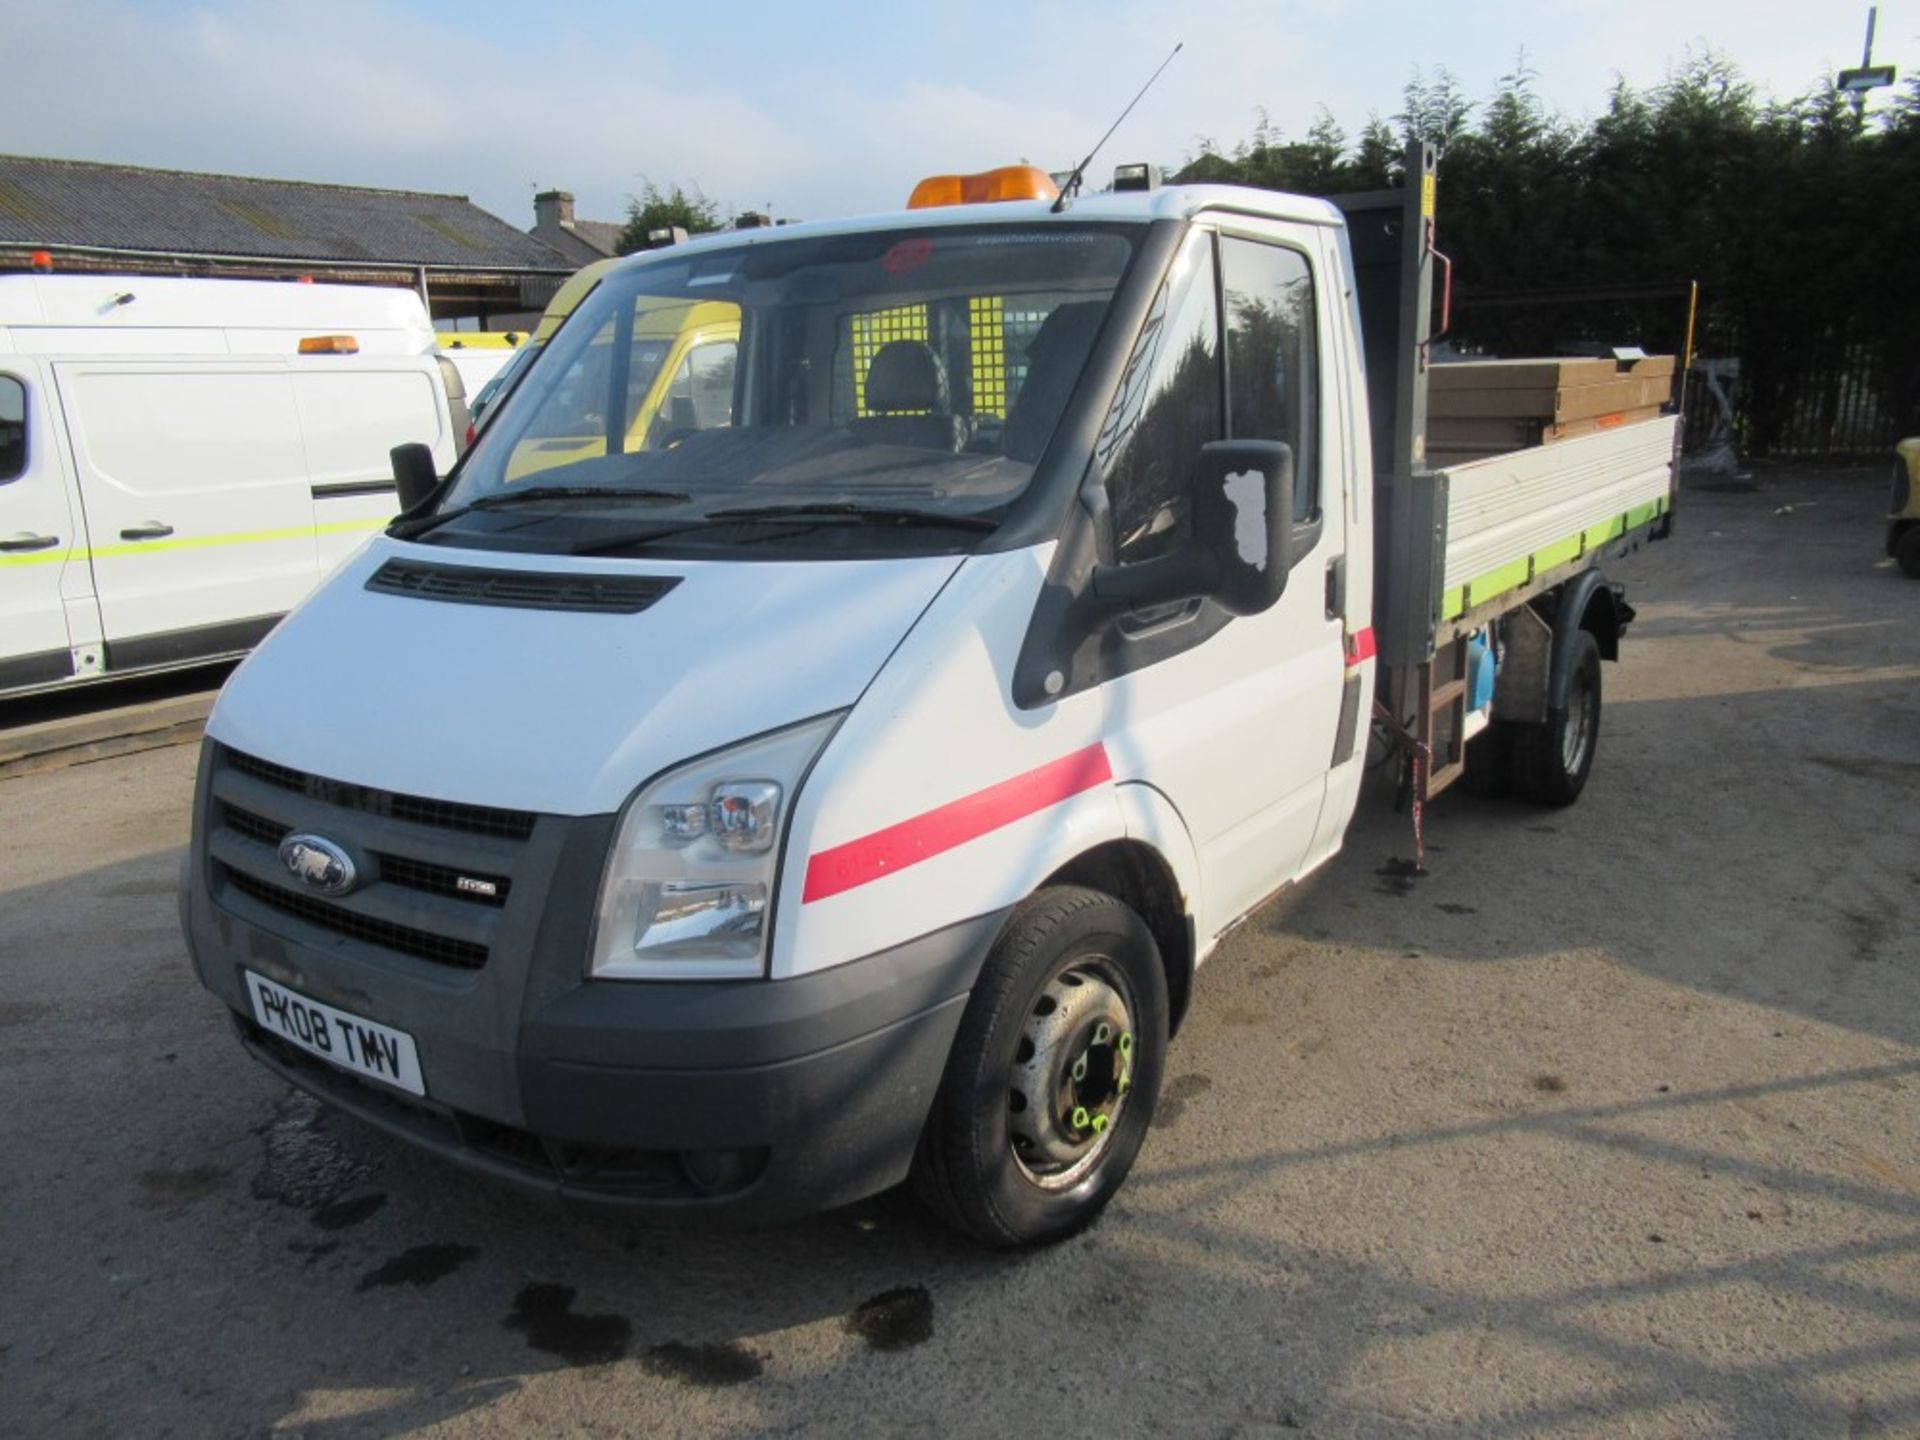 08 reg FORD TRANSIT 100 T350M TIPPER (DIRECT COUNCIL) 1ST REG 03/08, 52213M, V5 HERE, 1 OWNER FROM - Bild 2 aus 5